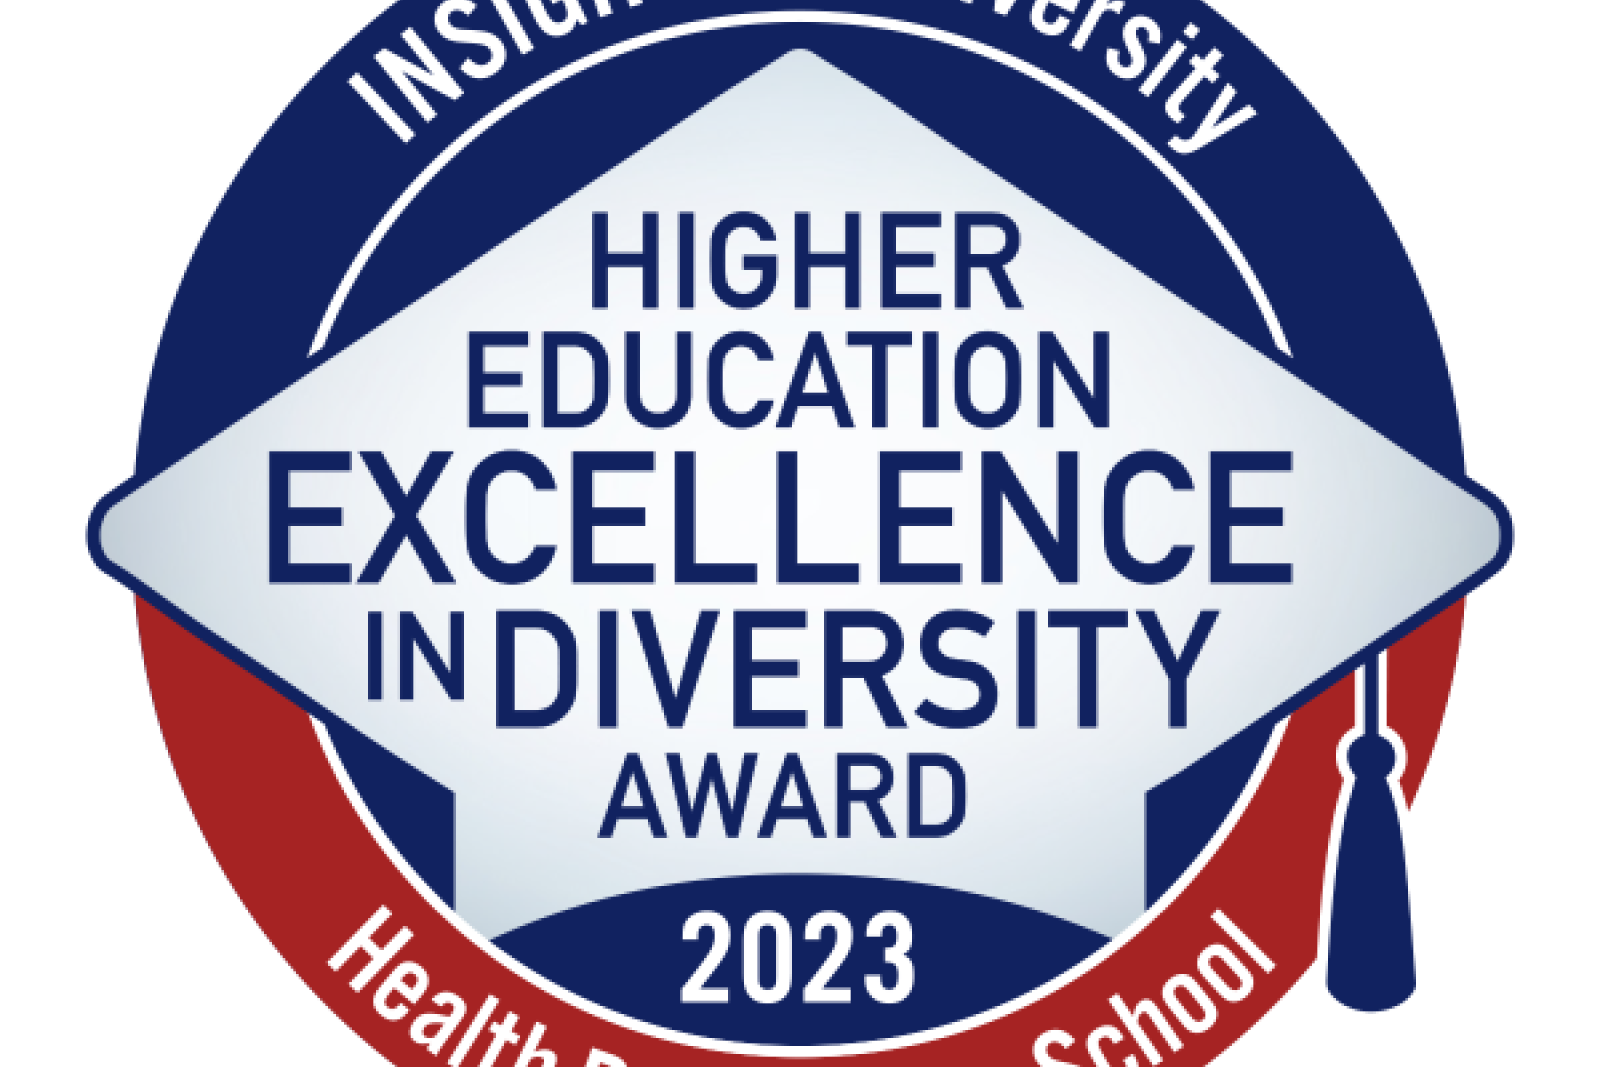 Award Symbol reading "Insight Into Diversity Higher Education in Excellence in Diversity Award 2023, Health Professions School"